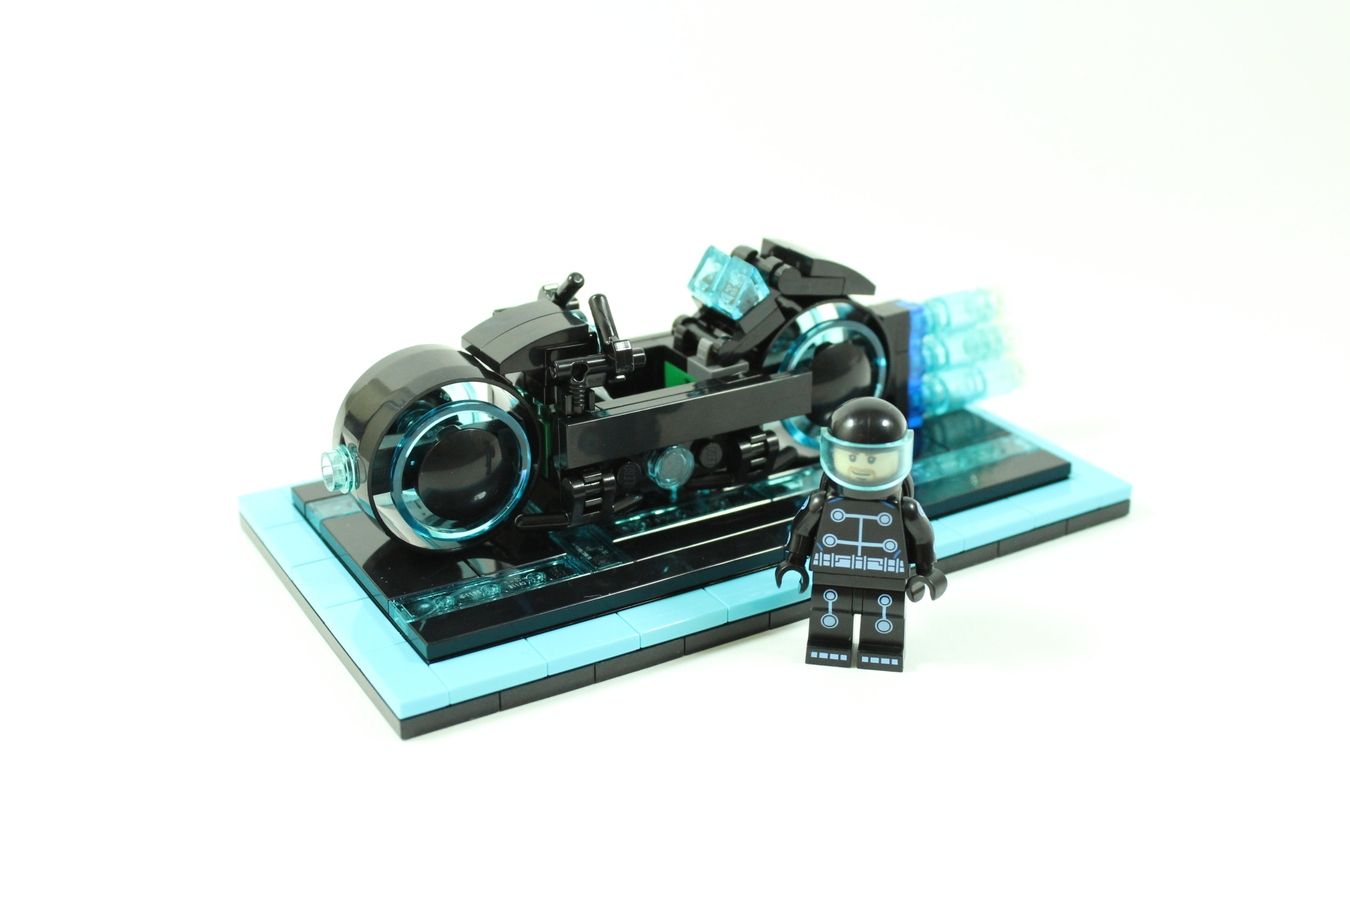 2018 LEGO might end up making a full scale model of the TRON Light Cycle